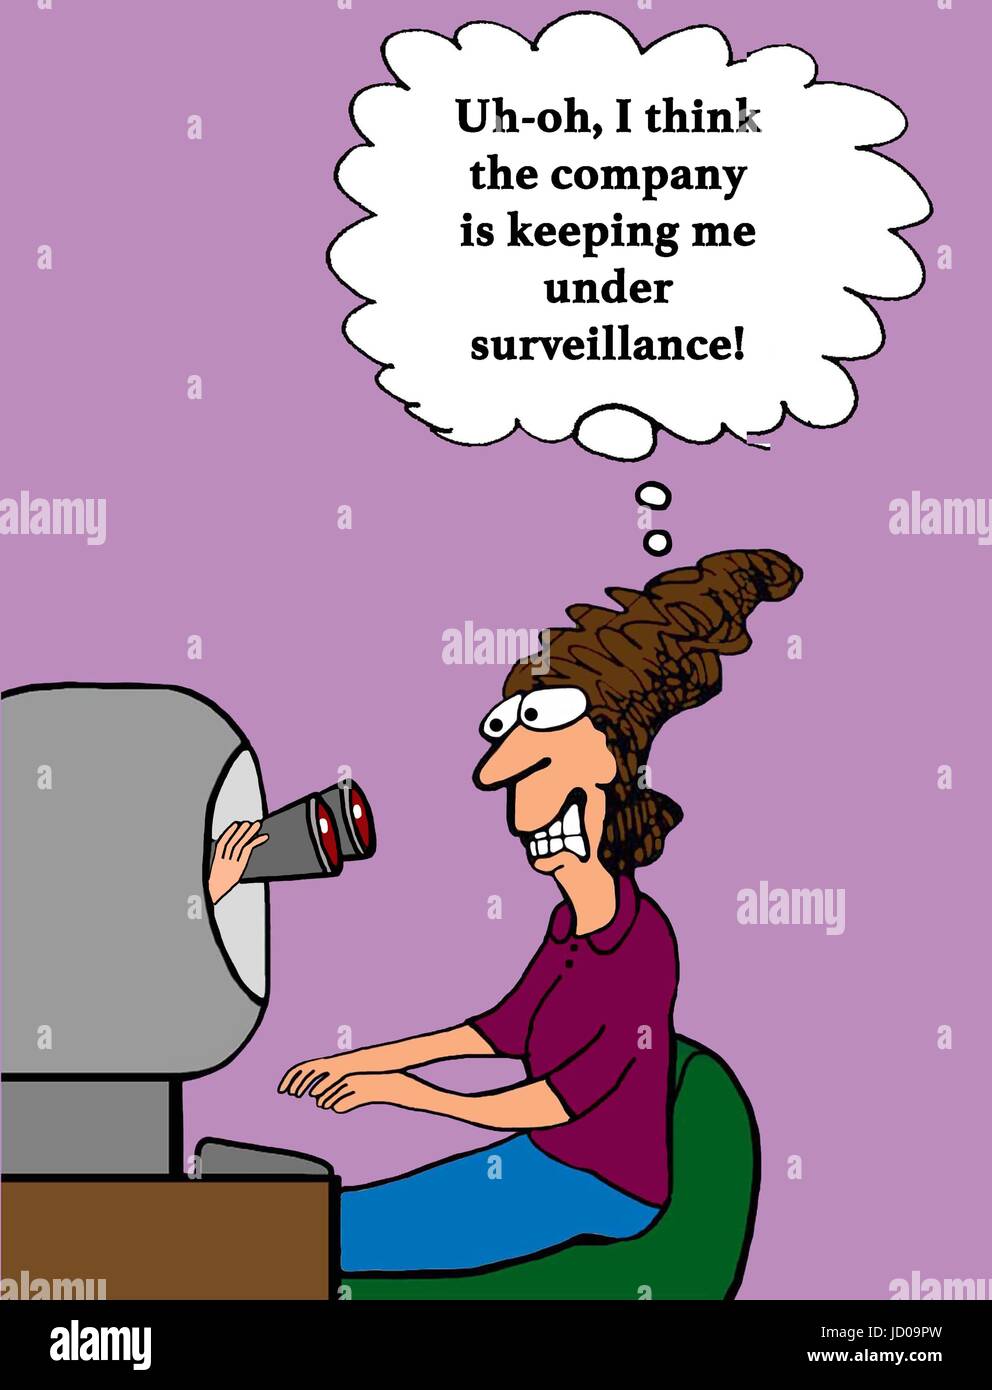 Business cartoon about a company keeping a business woman under surveillance. Stock Photo